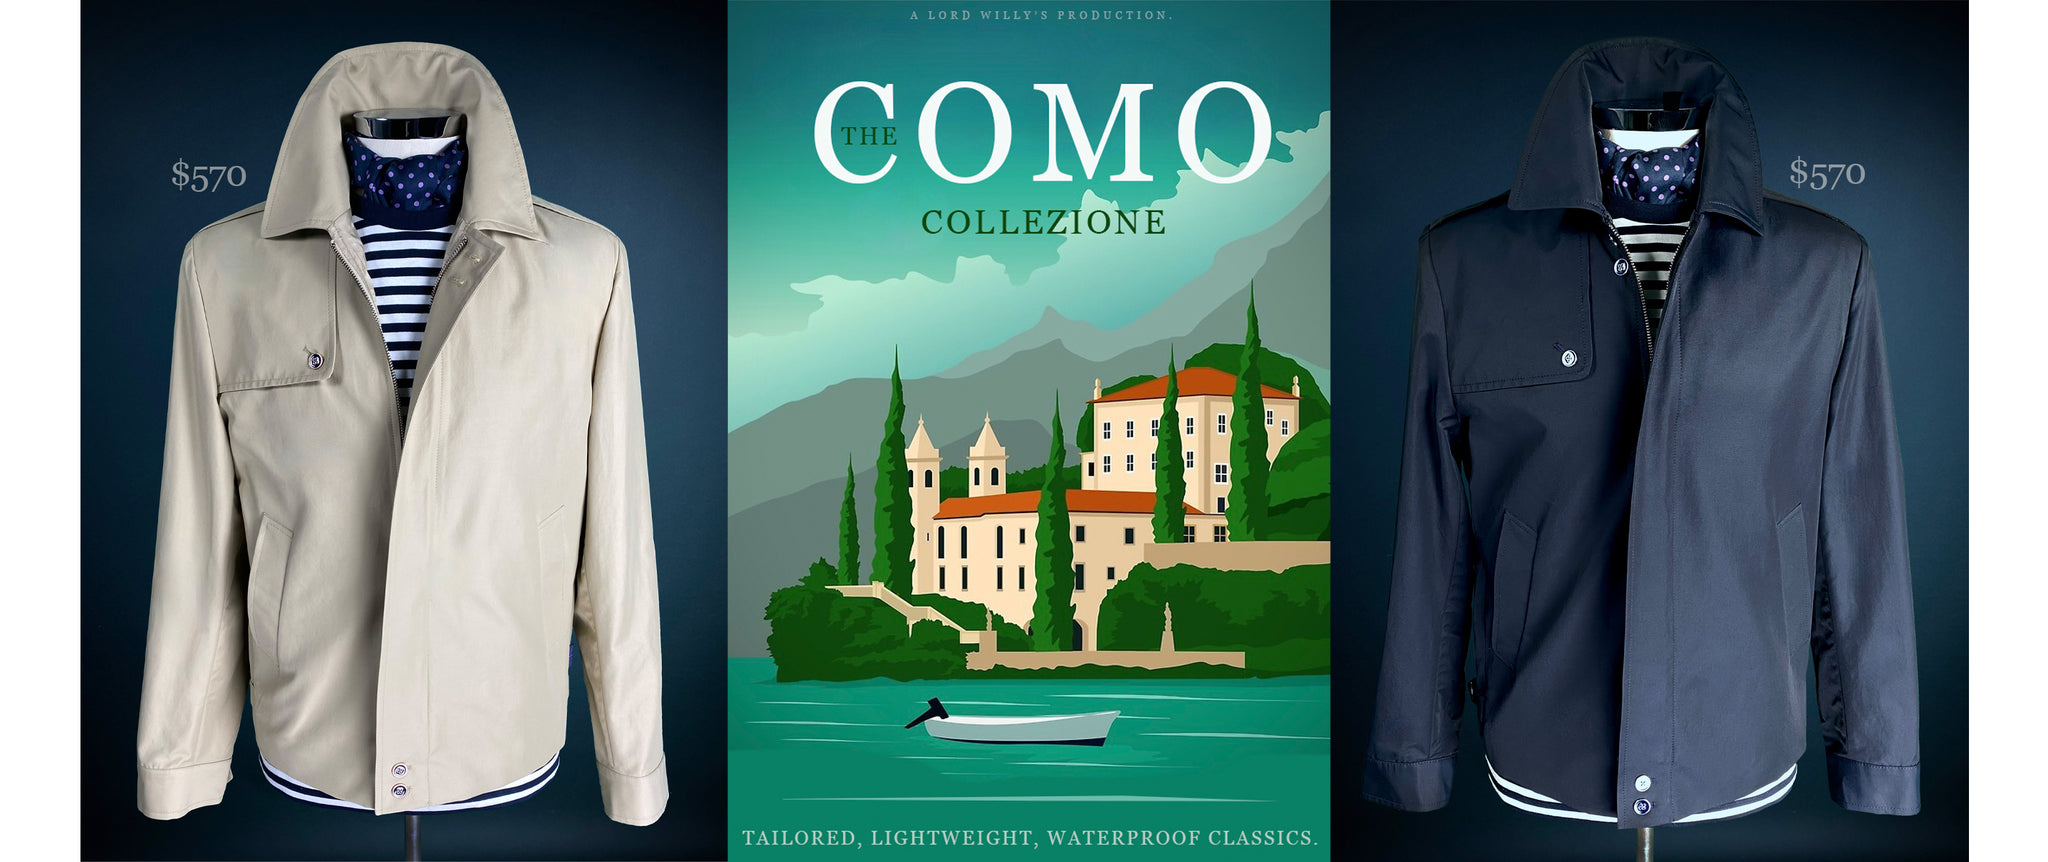 2 Harringtons are shown. One in navy, the other in tan. They are priced at $570 each. There is an illustration of Lake Como. 